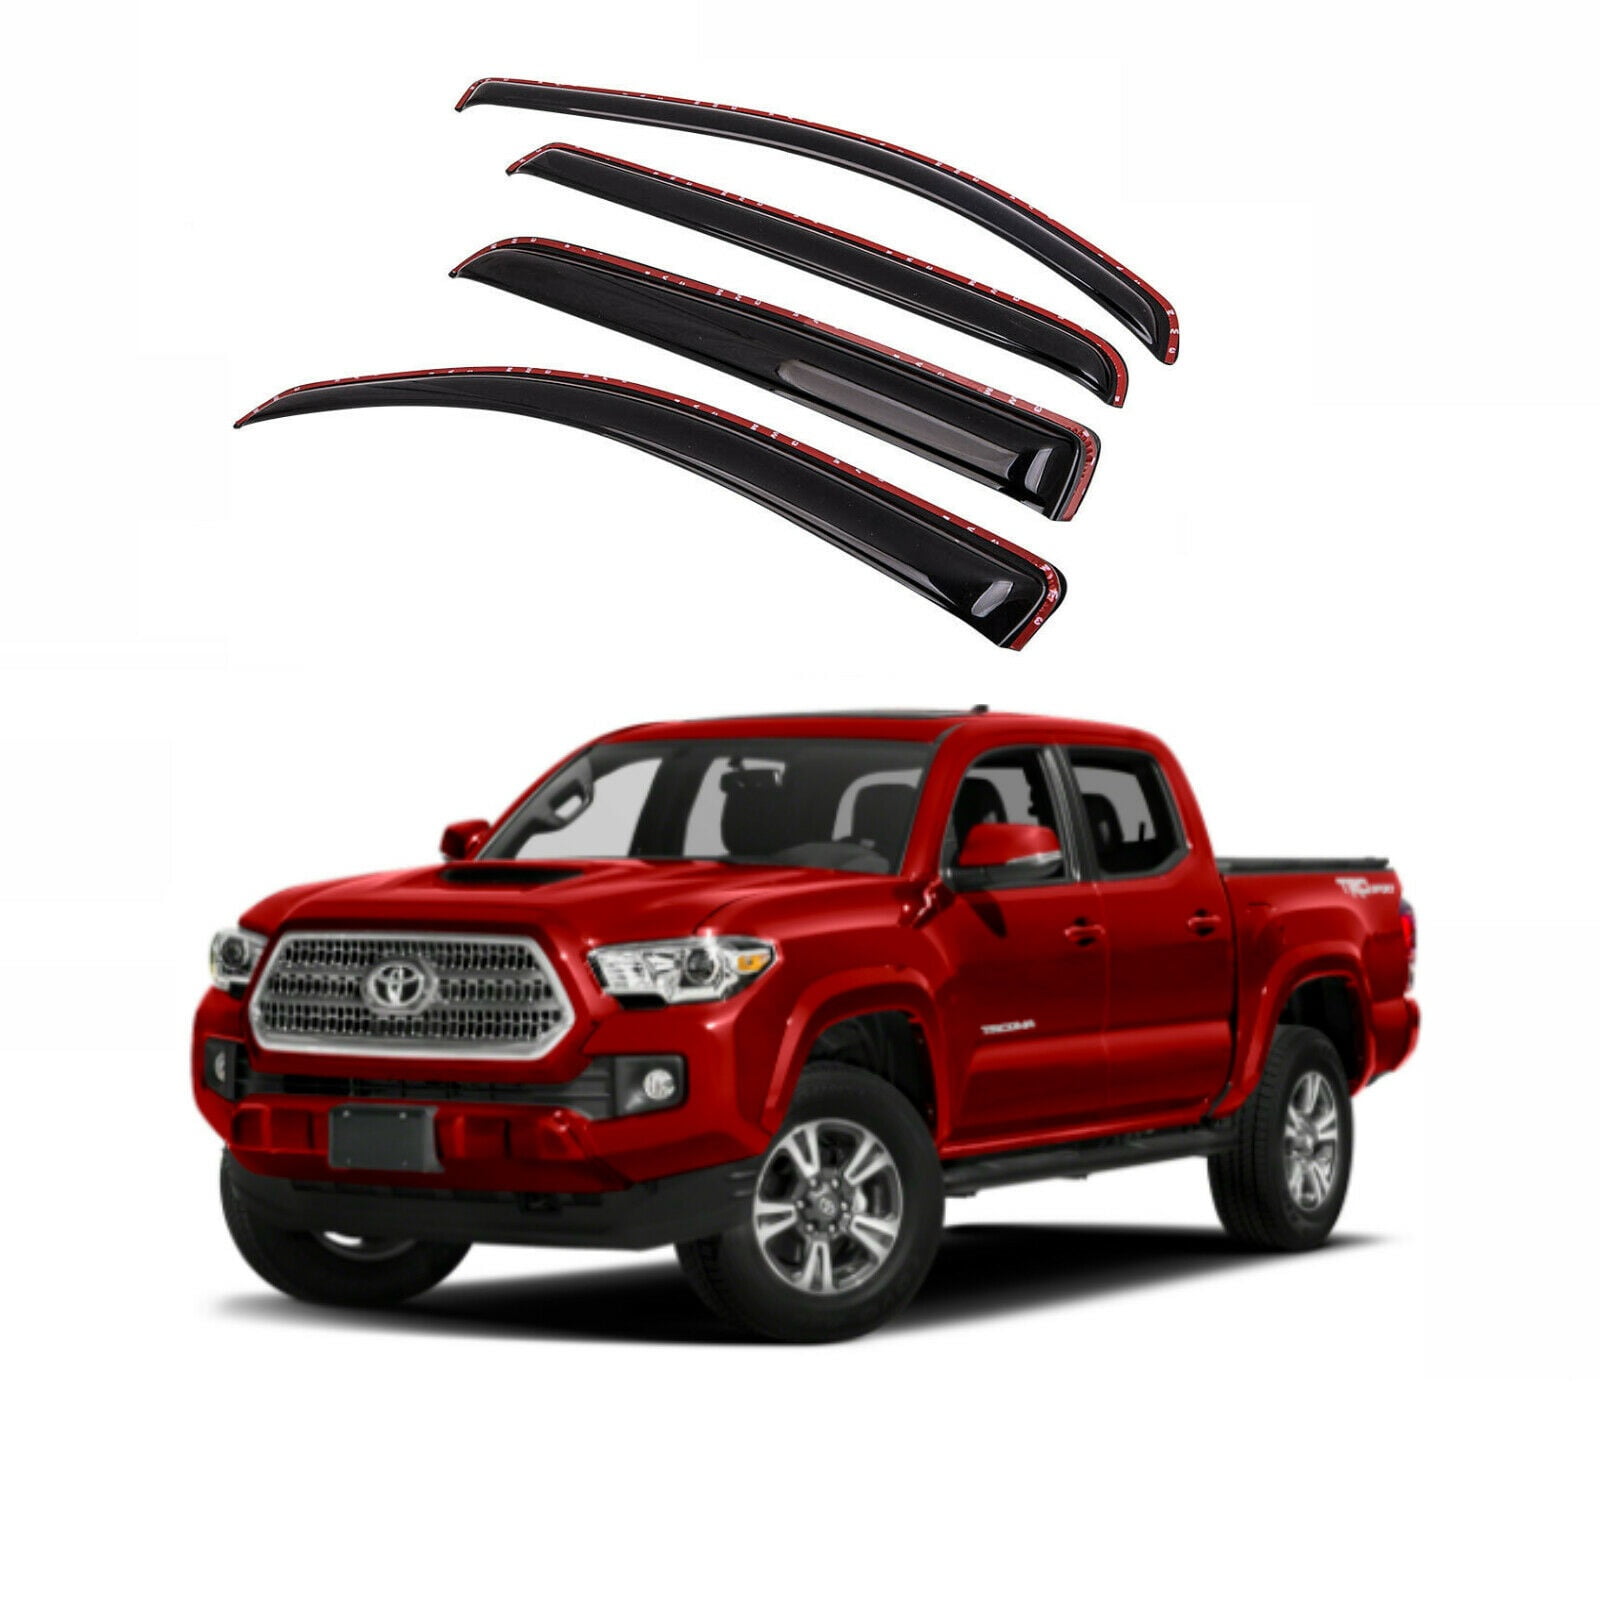 Details about   4pcs Smoke Tint Rain Guard Window Visors for Toyota Tacoma Extended Cab 95-04